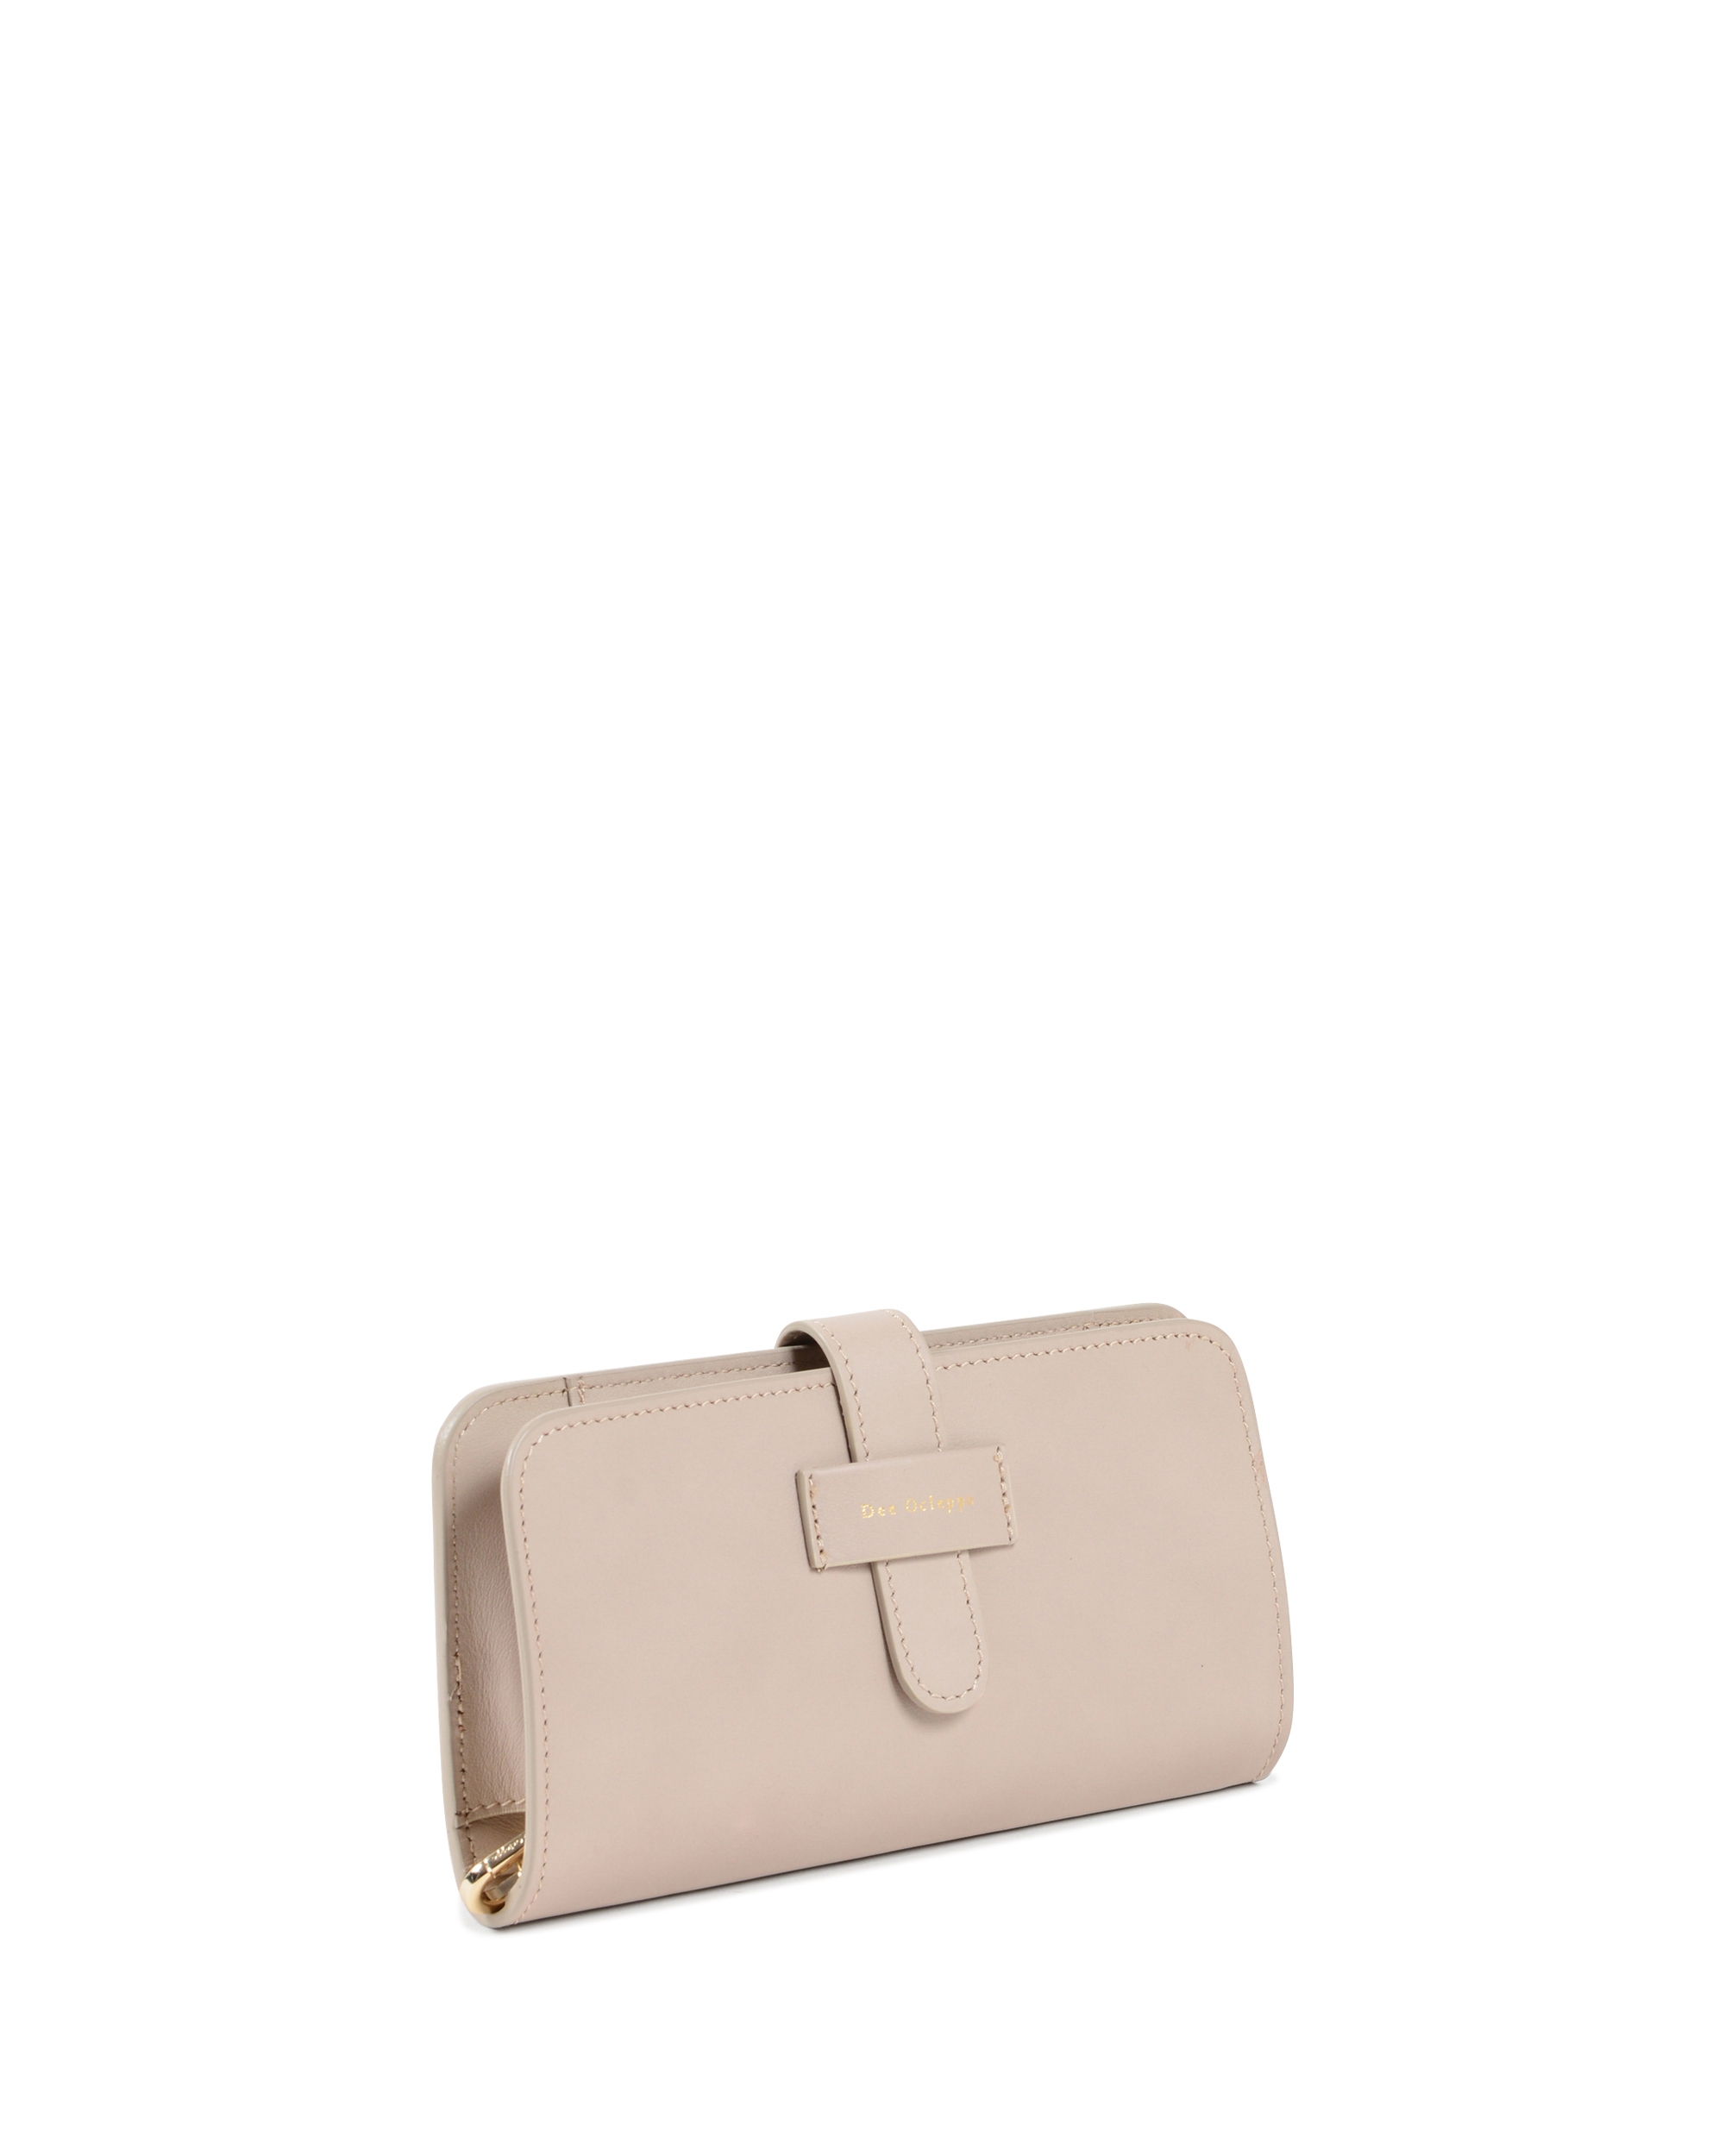 MB2522 WALLET SOFT TAUPE